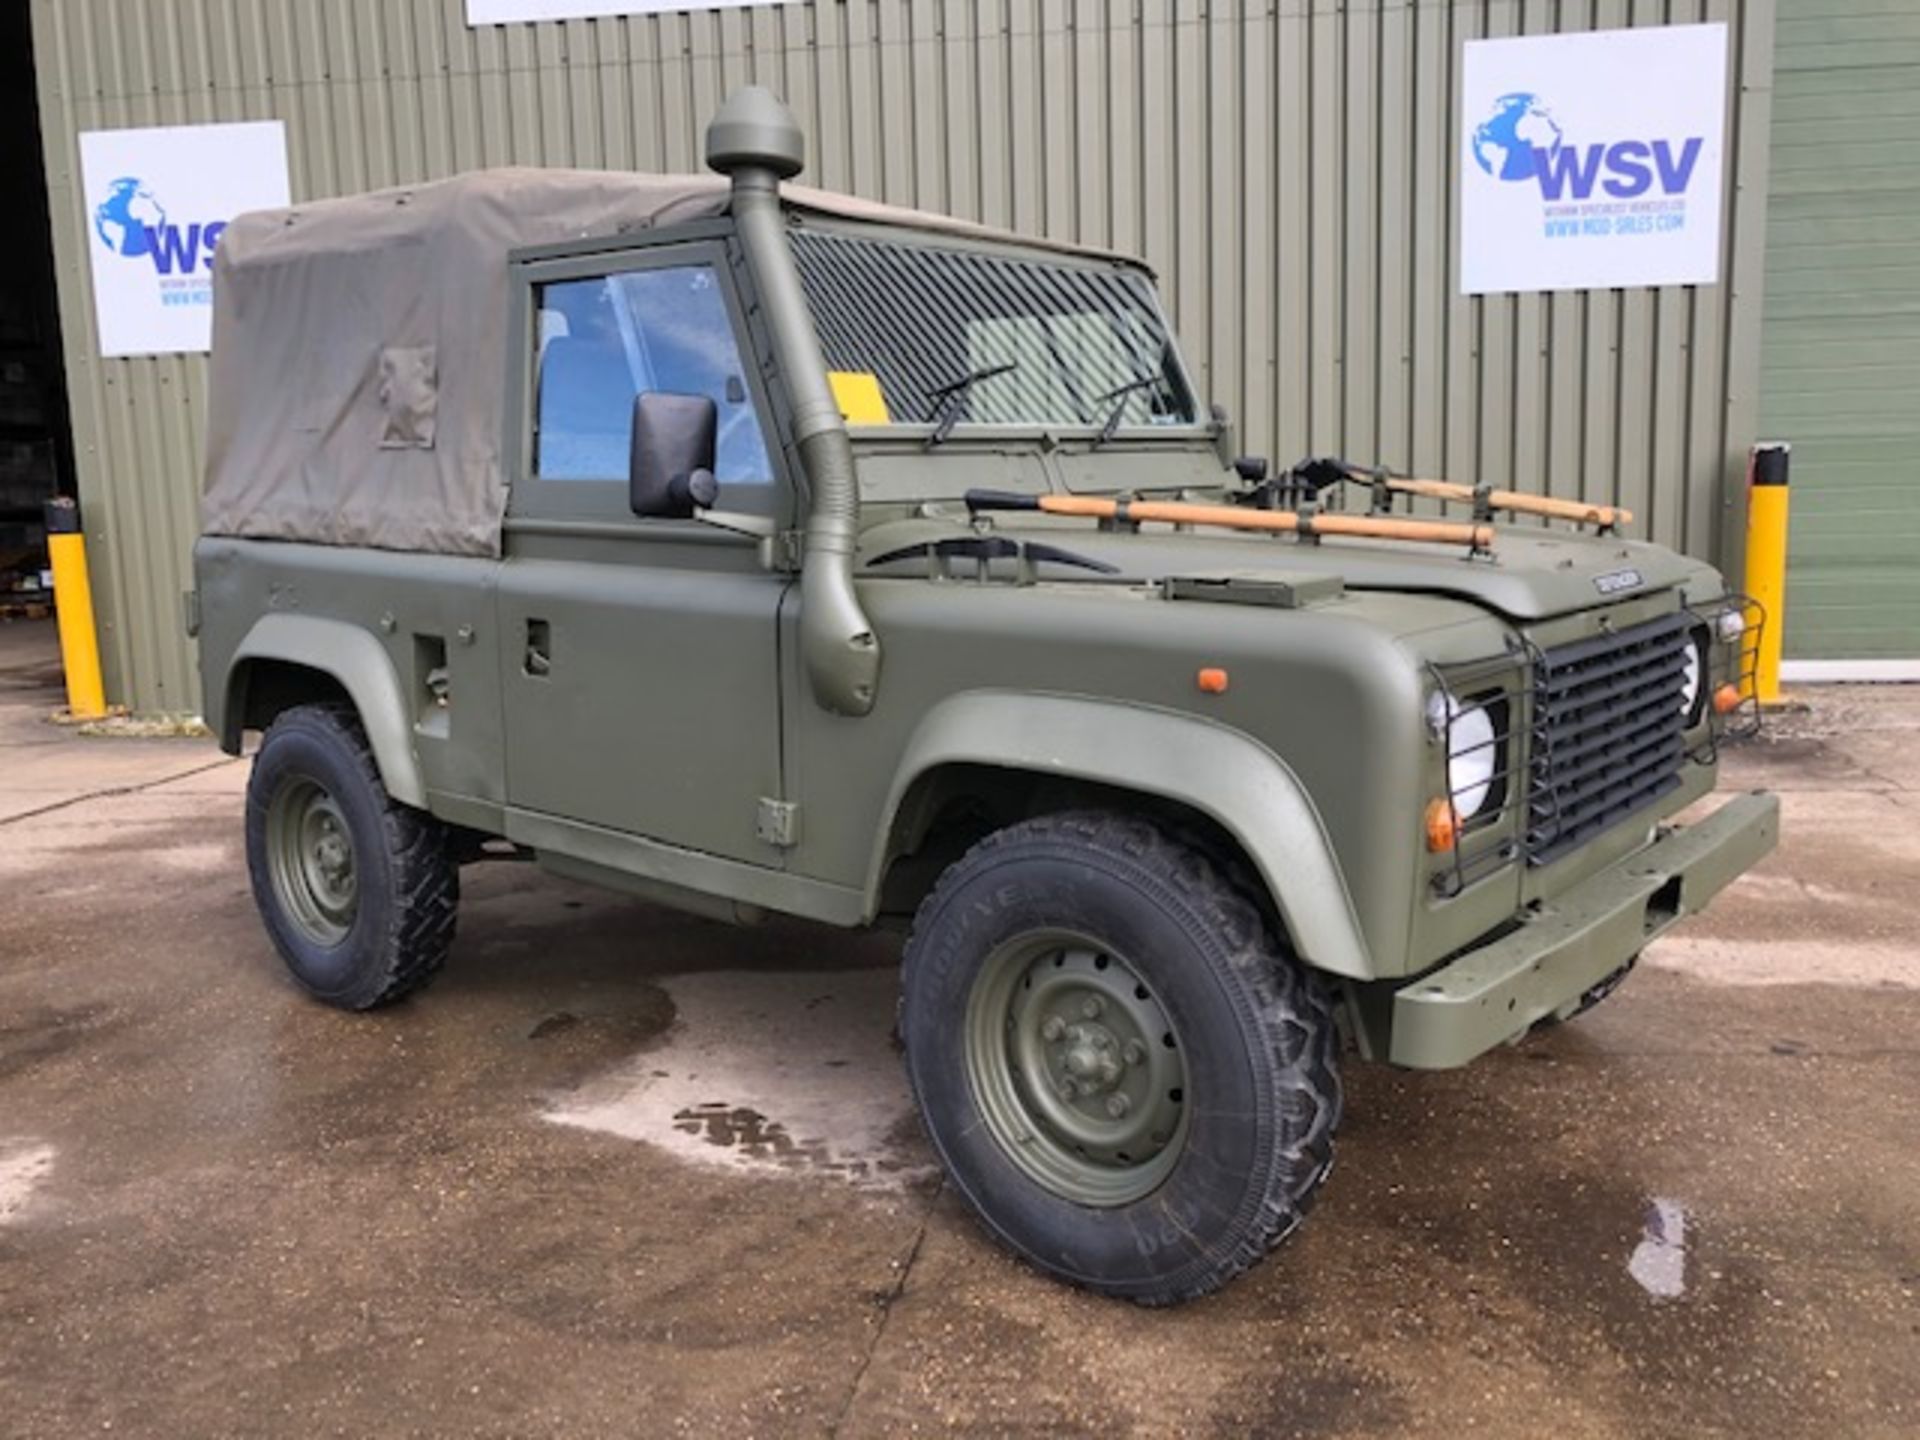 1998 Land Rover Wolf 90 Soft Top with Remus upgrade ONLY 12,162km - approx 7.000 miles!